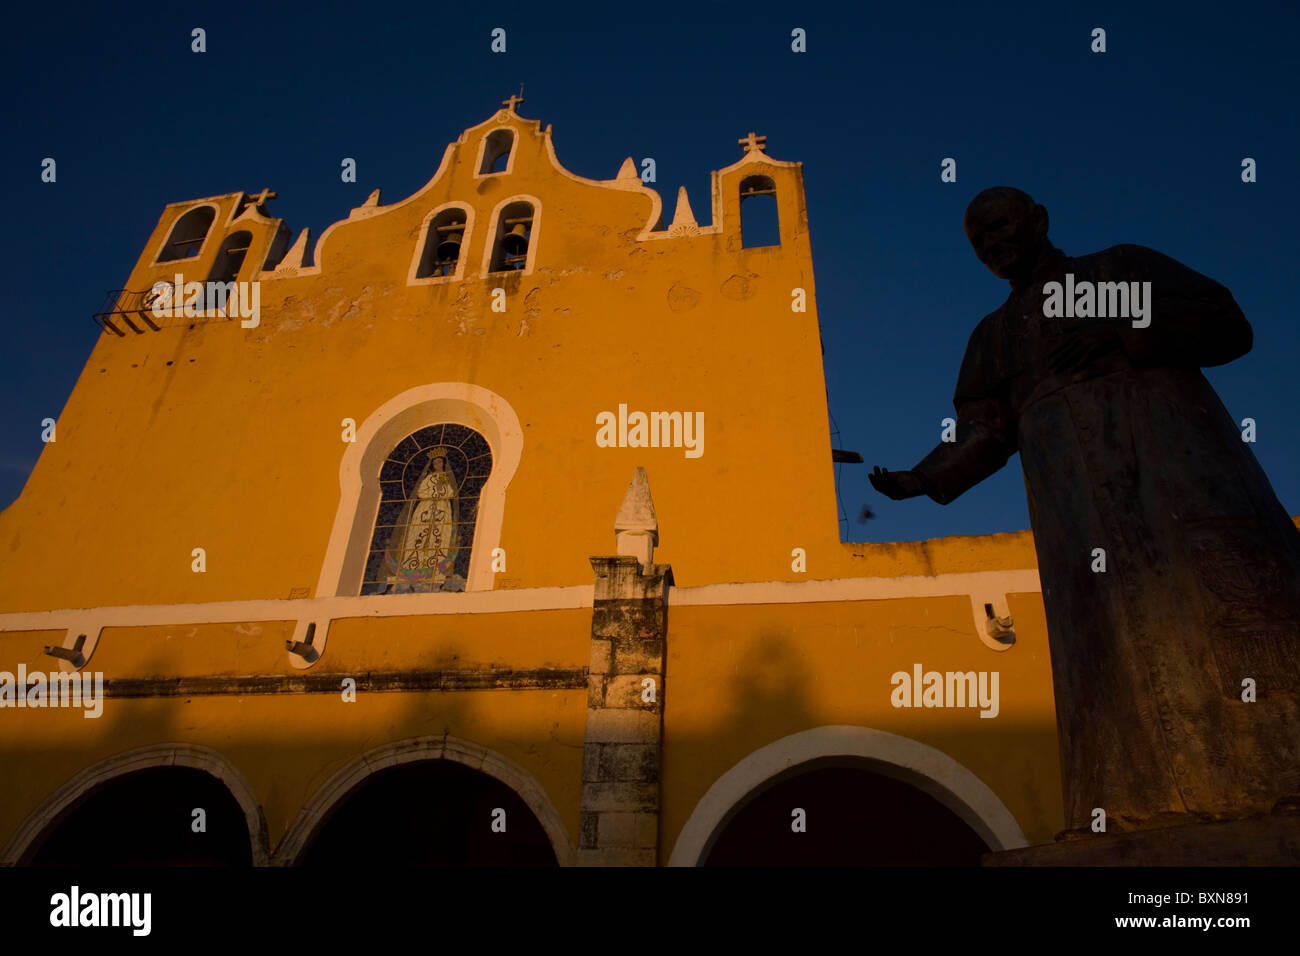 A statue of Pope John Paul II is displayed ant the entrance of the San Antonio de Padua convent in Izamal, Yucatan, Mexico. Stock Photo